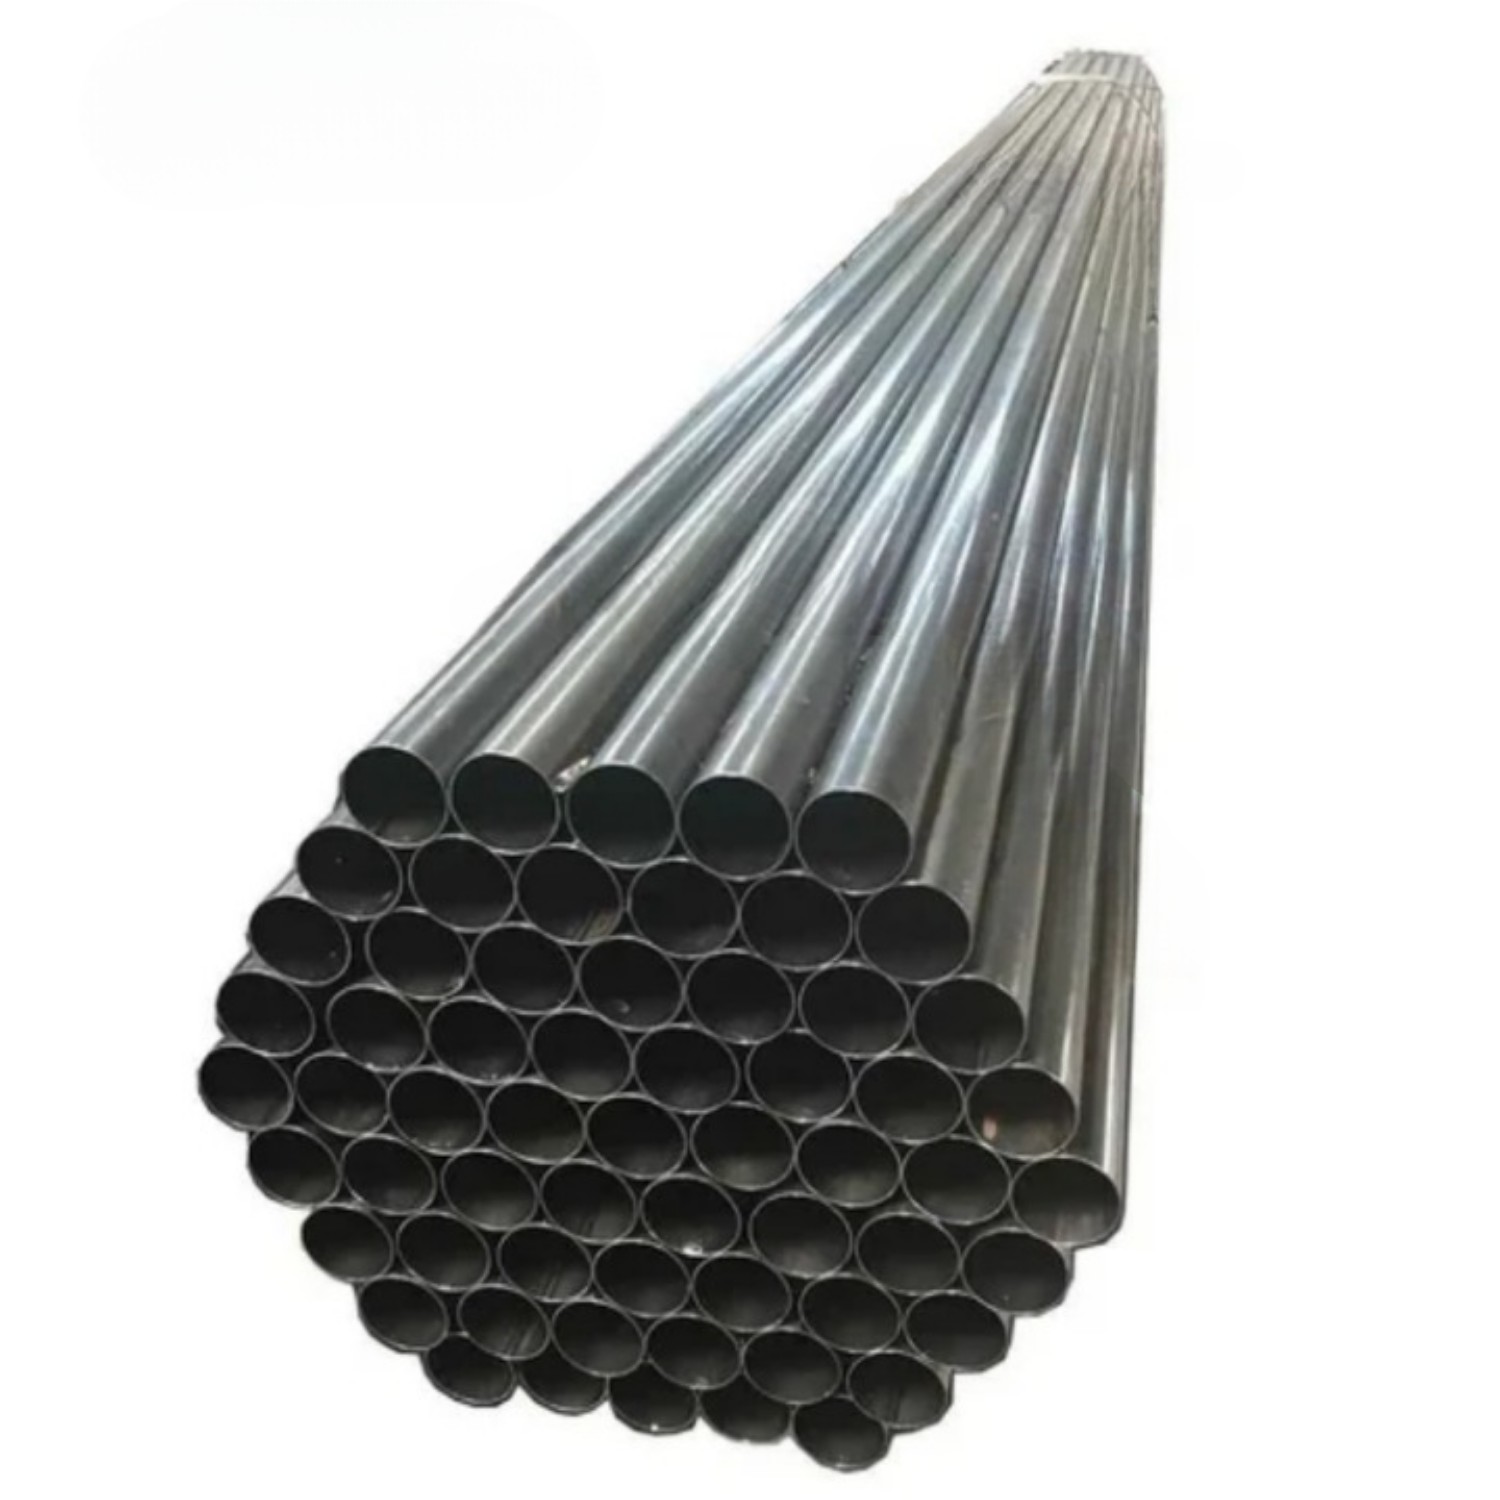 APL APOLLO 100 mm Hot Rolled MS Pipes IS 1161 6 m_0